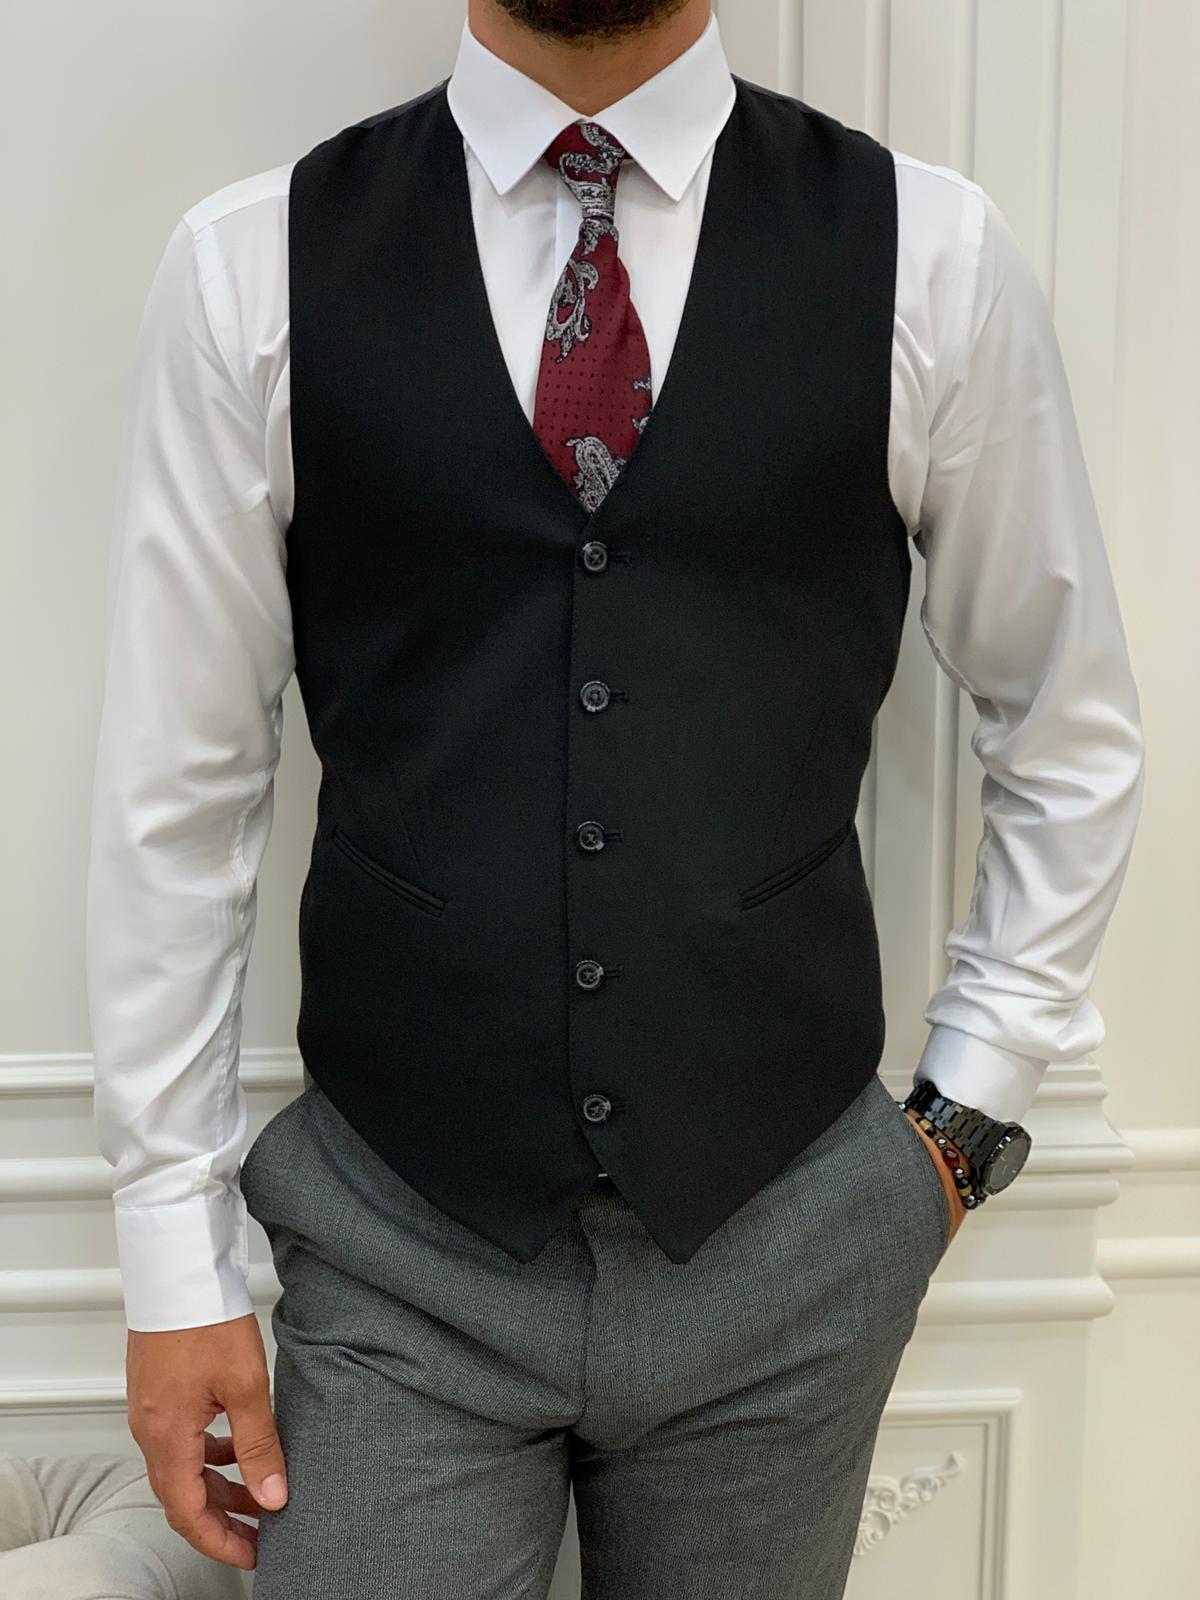 Buy Black Suit With Grey Vest ✓ Free Shipping in USA